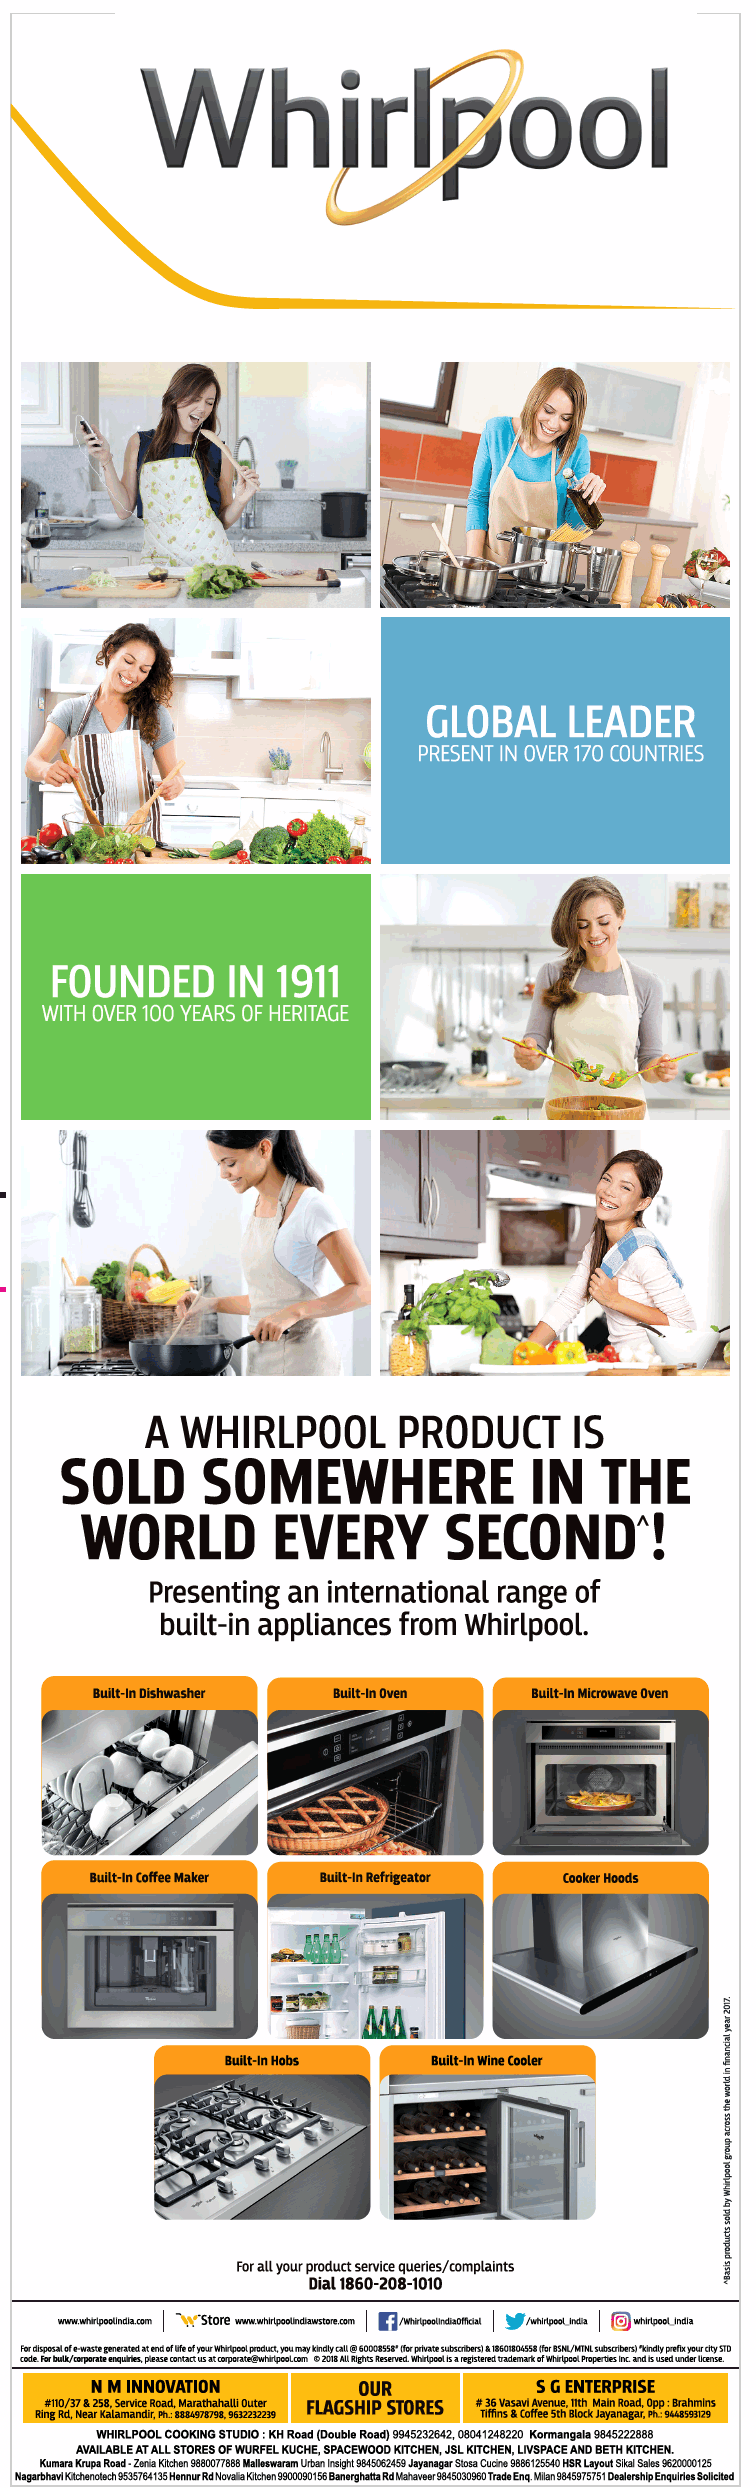 whirlpool-product-is-solid-somewhere-in-the-world-every-second-ad-bangalore-times-05-01-2019.png